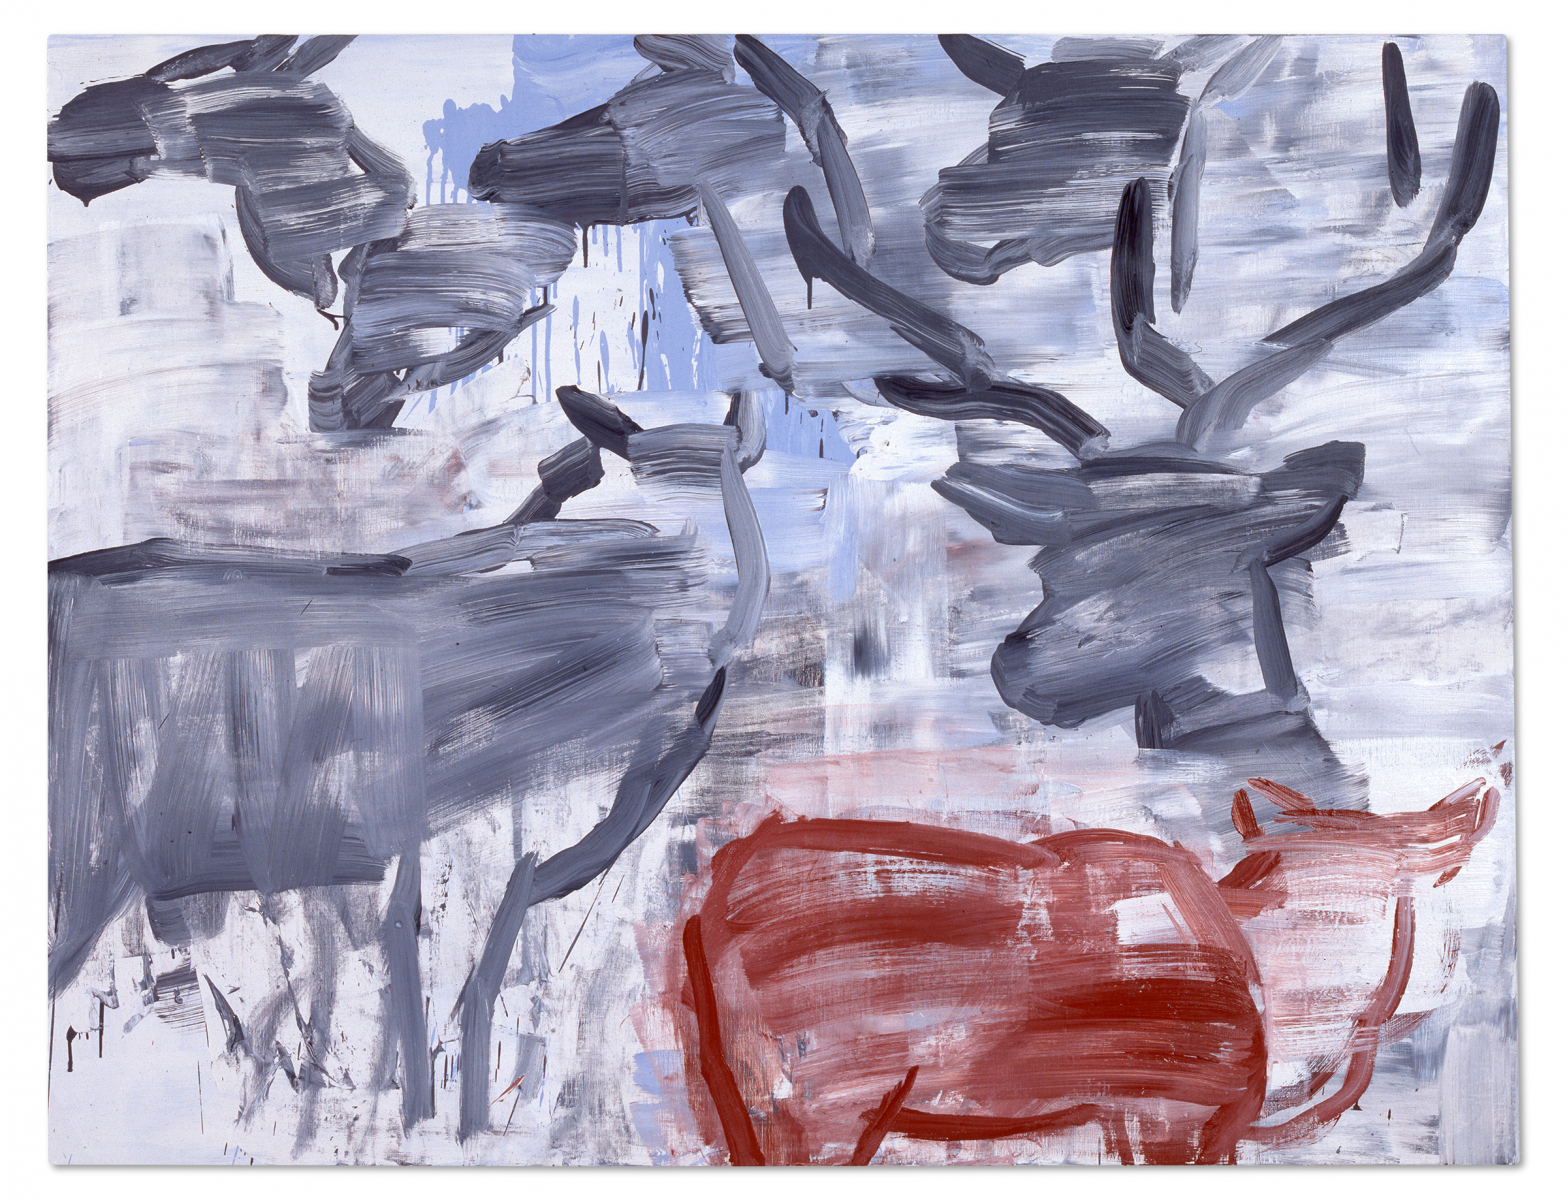 Untitled-93039, 1993, Oil on Canvas, 145x113cm